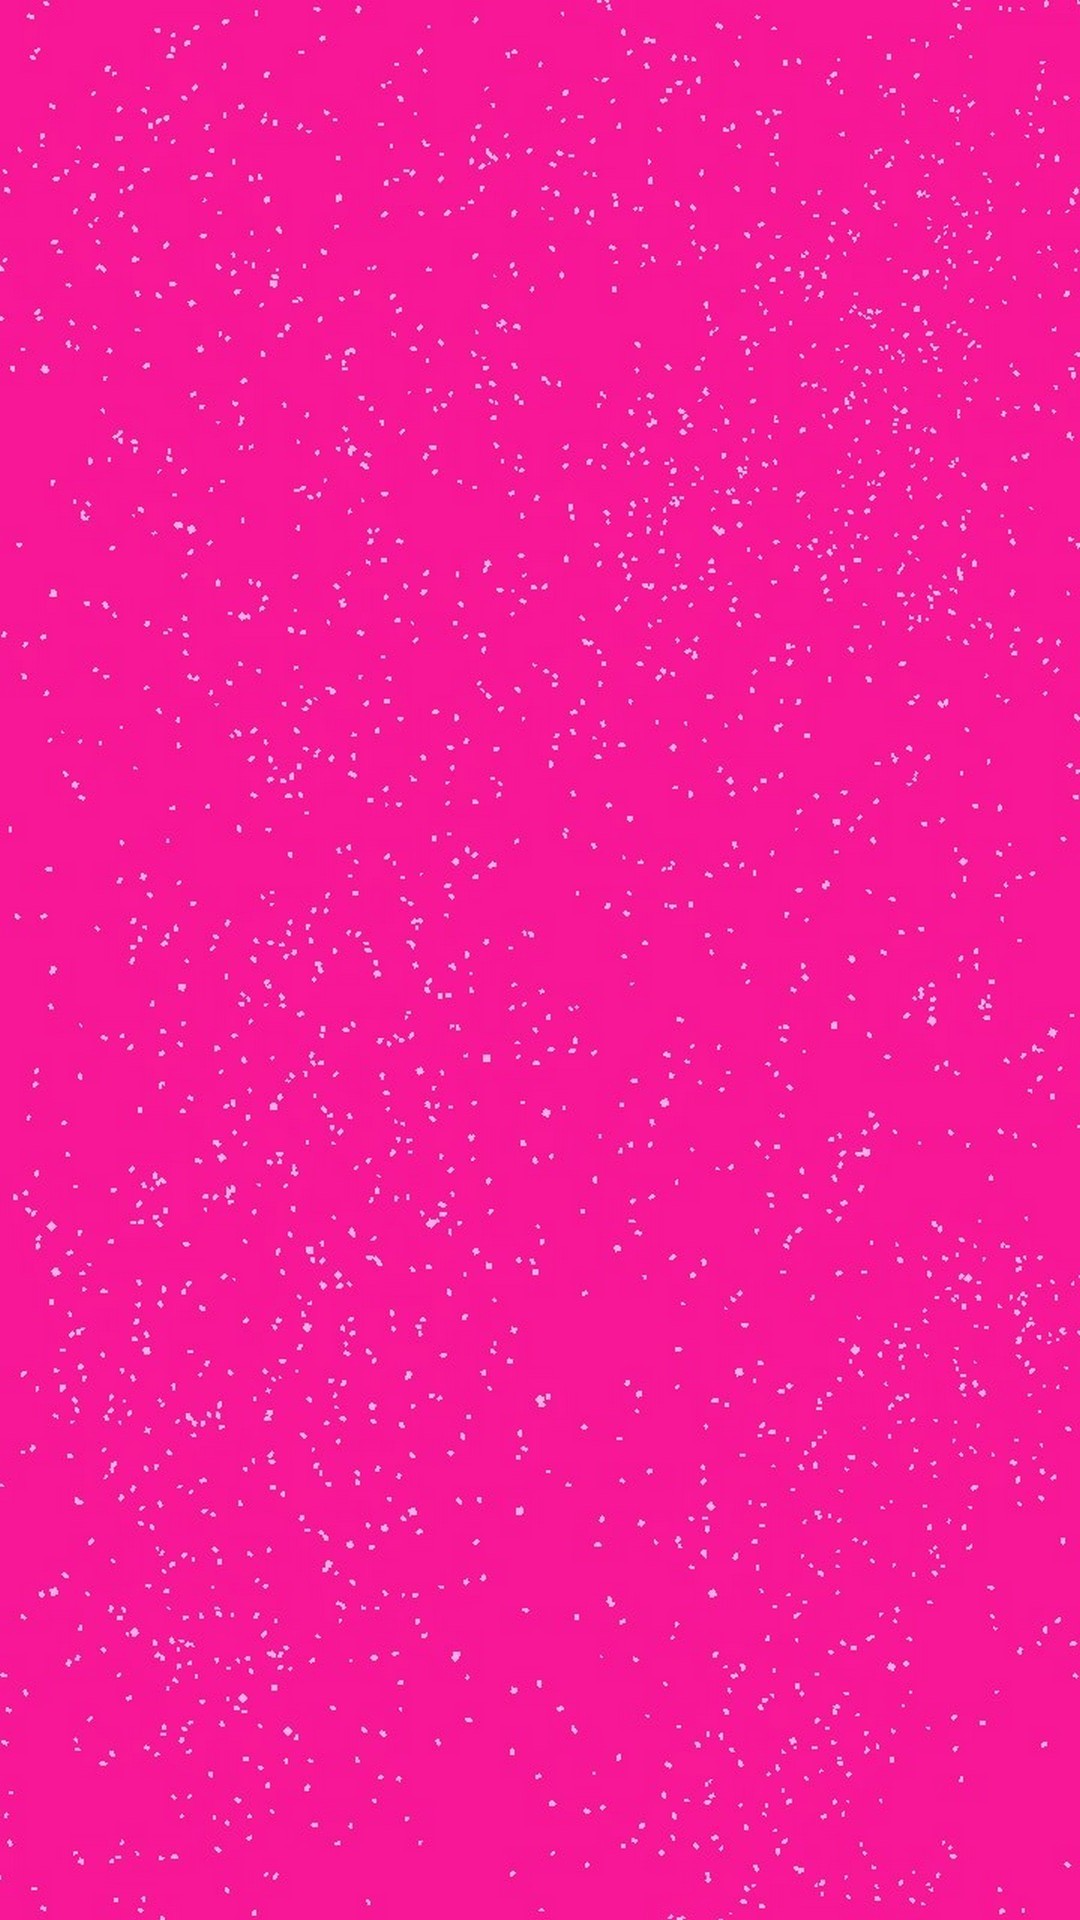 Pink Glitter Wallpaper Android with HD resolution 1080x1920